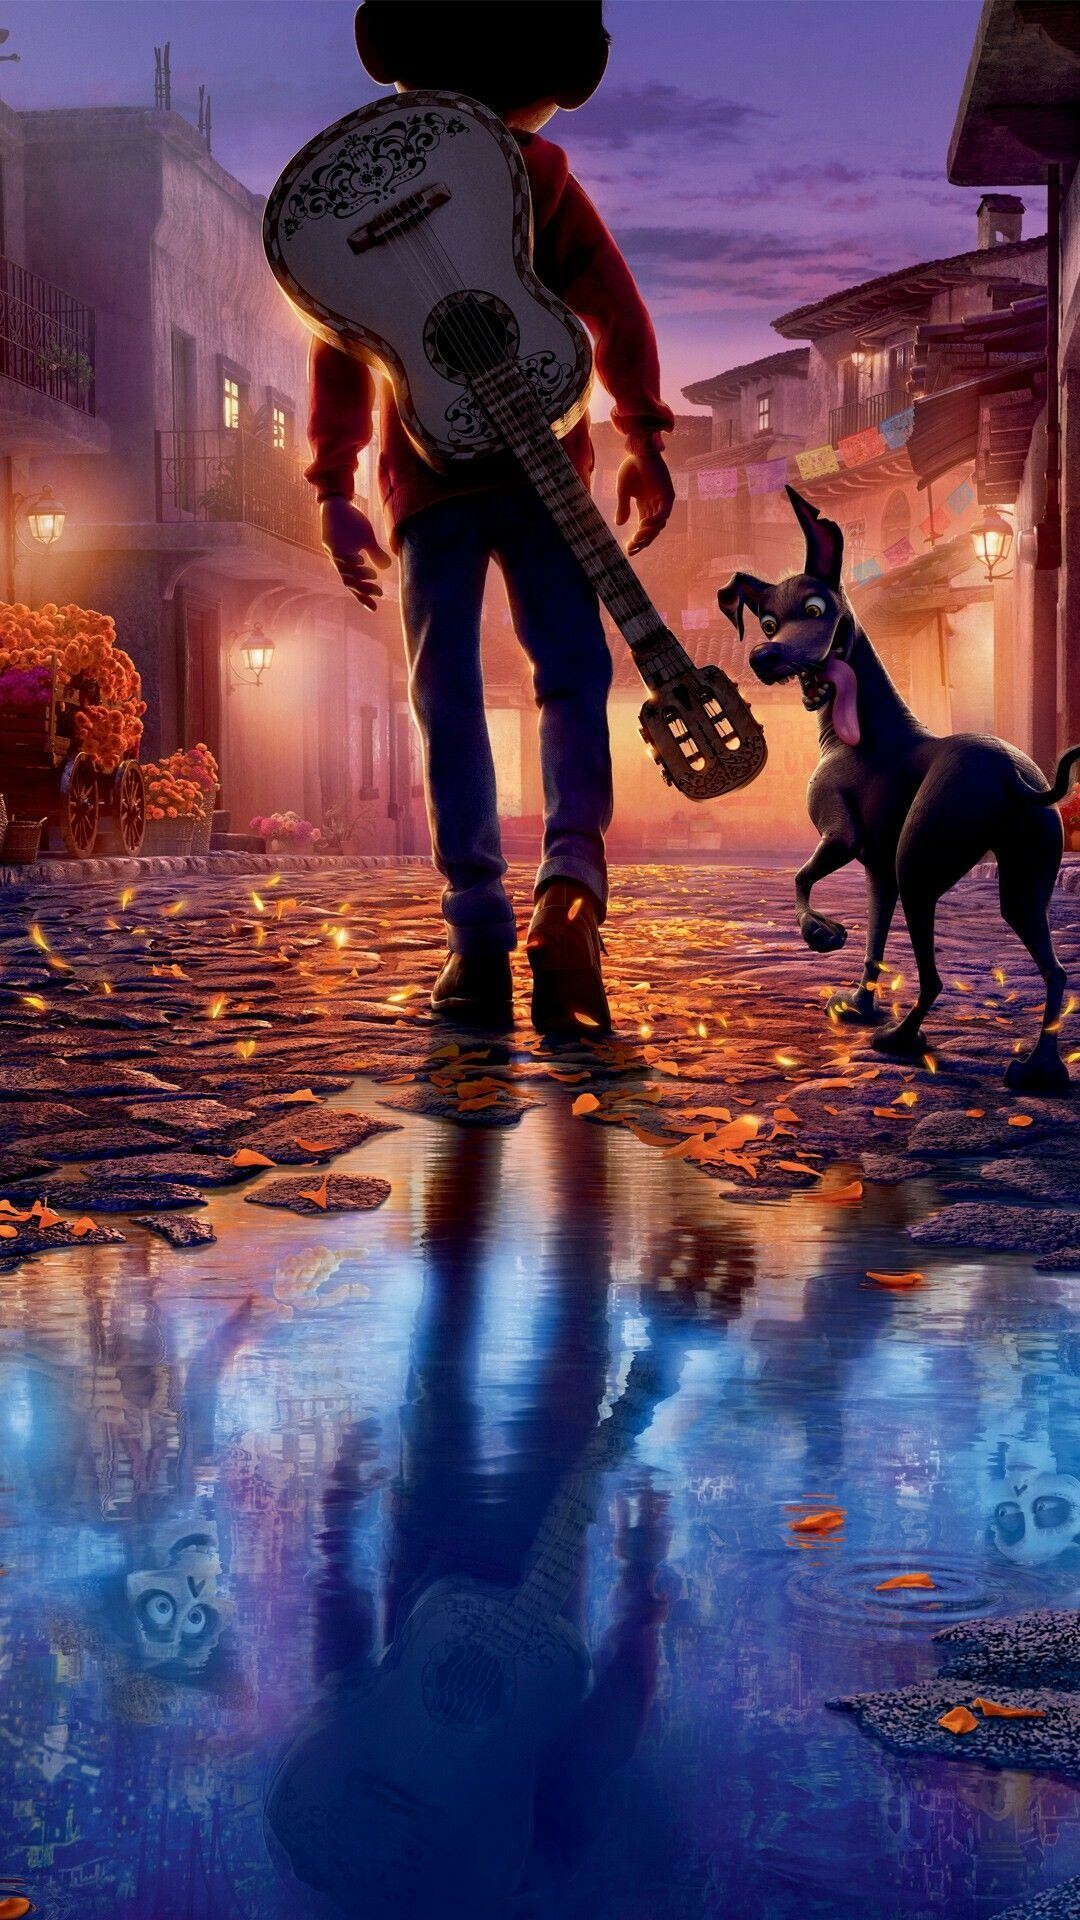 HD wallpaper, Vibrant Wallpapers, 1080X1920 Full Hd Phone, Adventure With Miguel, Phone Full Hd Coco Cartoon Wallpaper Image, Pixar Magic, Coco Animation